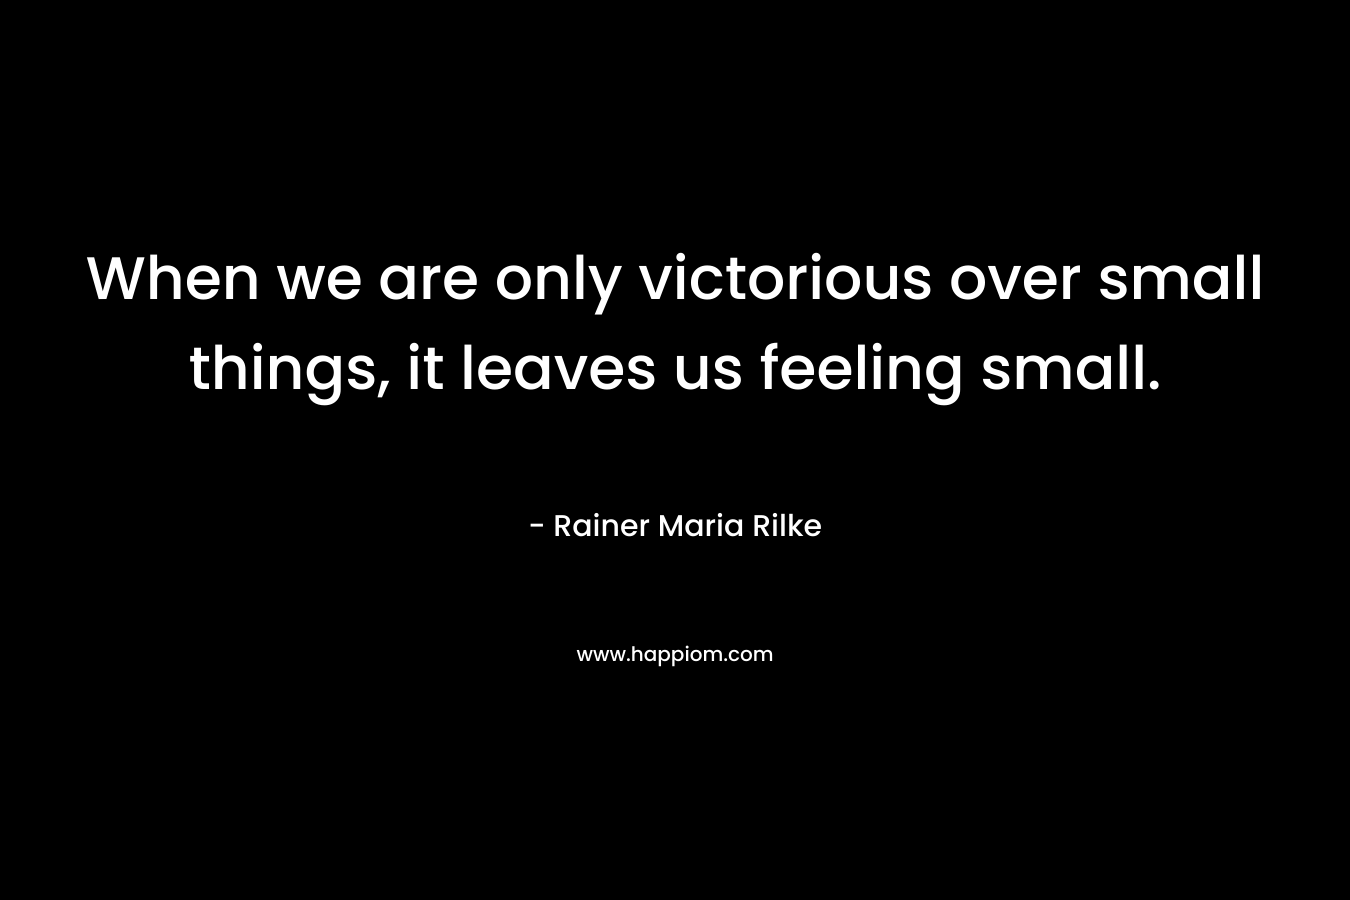 When we are only victorious over small things, it leaves us feeling small. – Rainer Maria Rilke